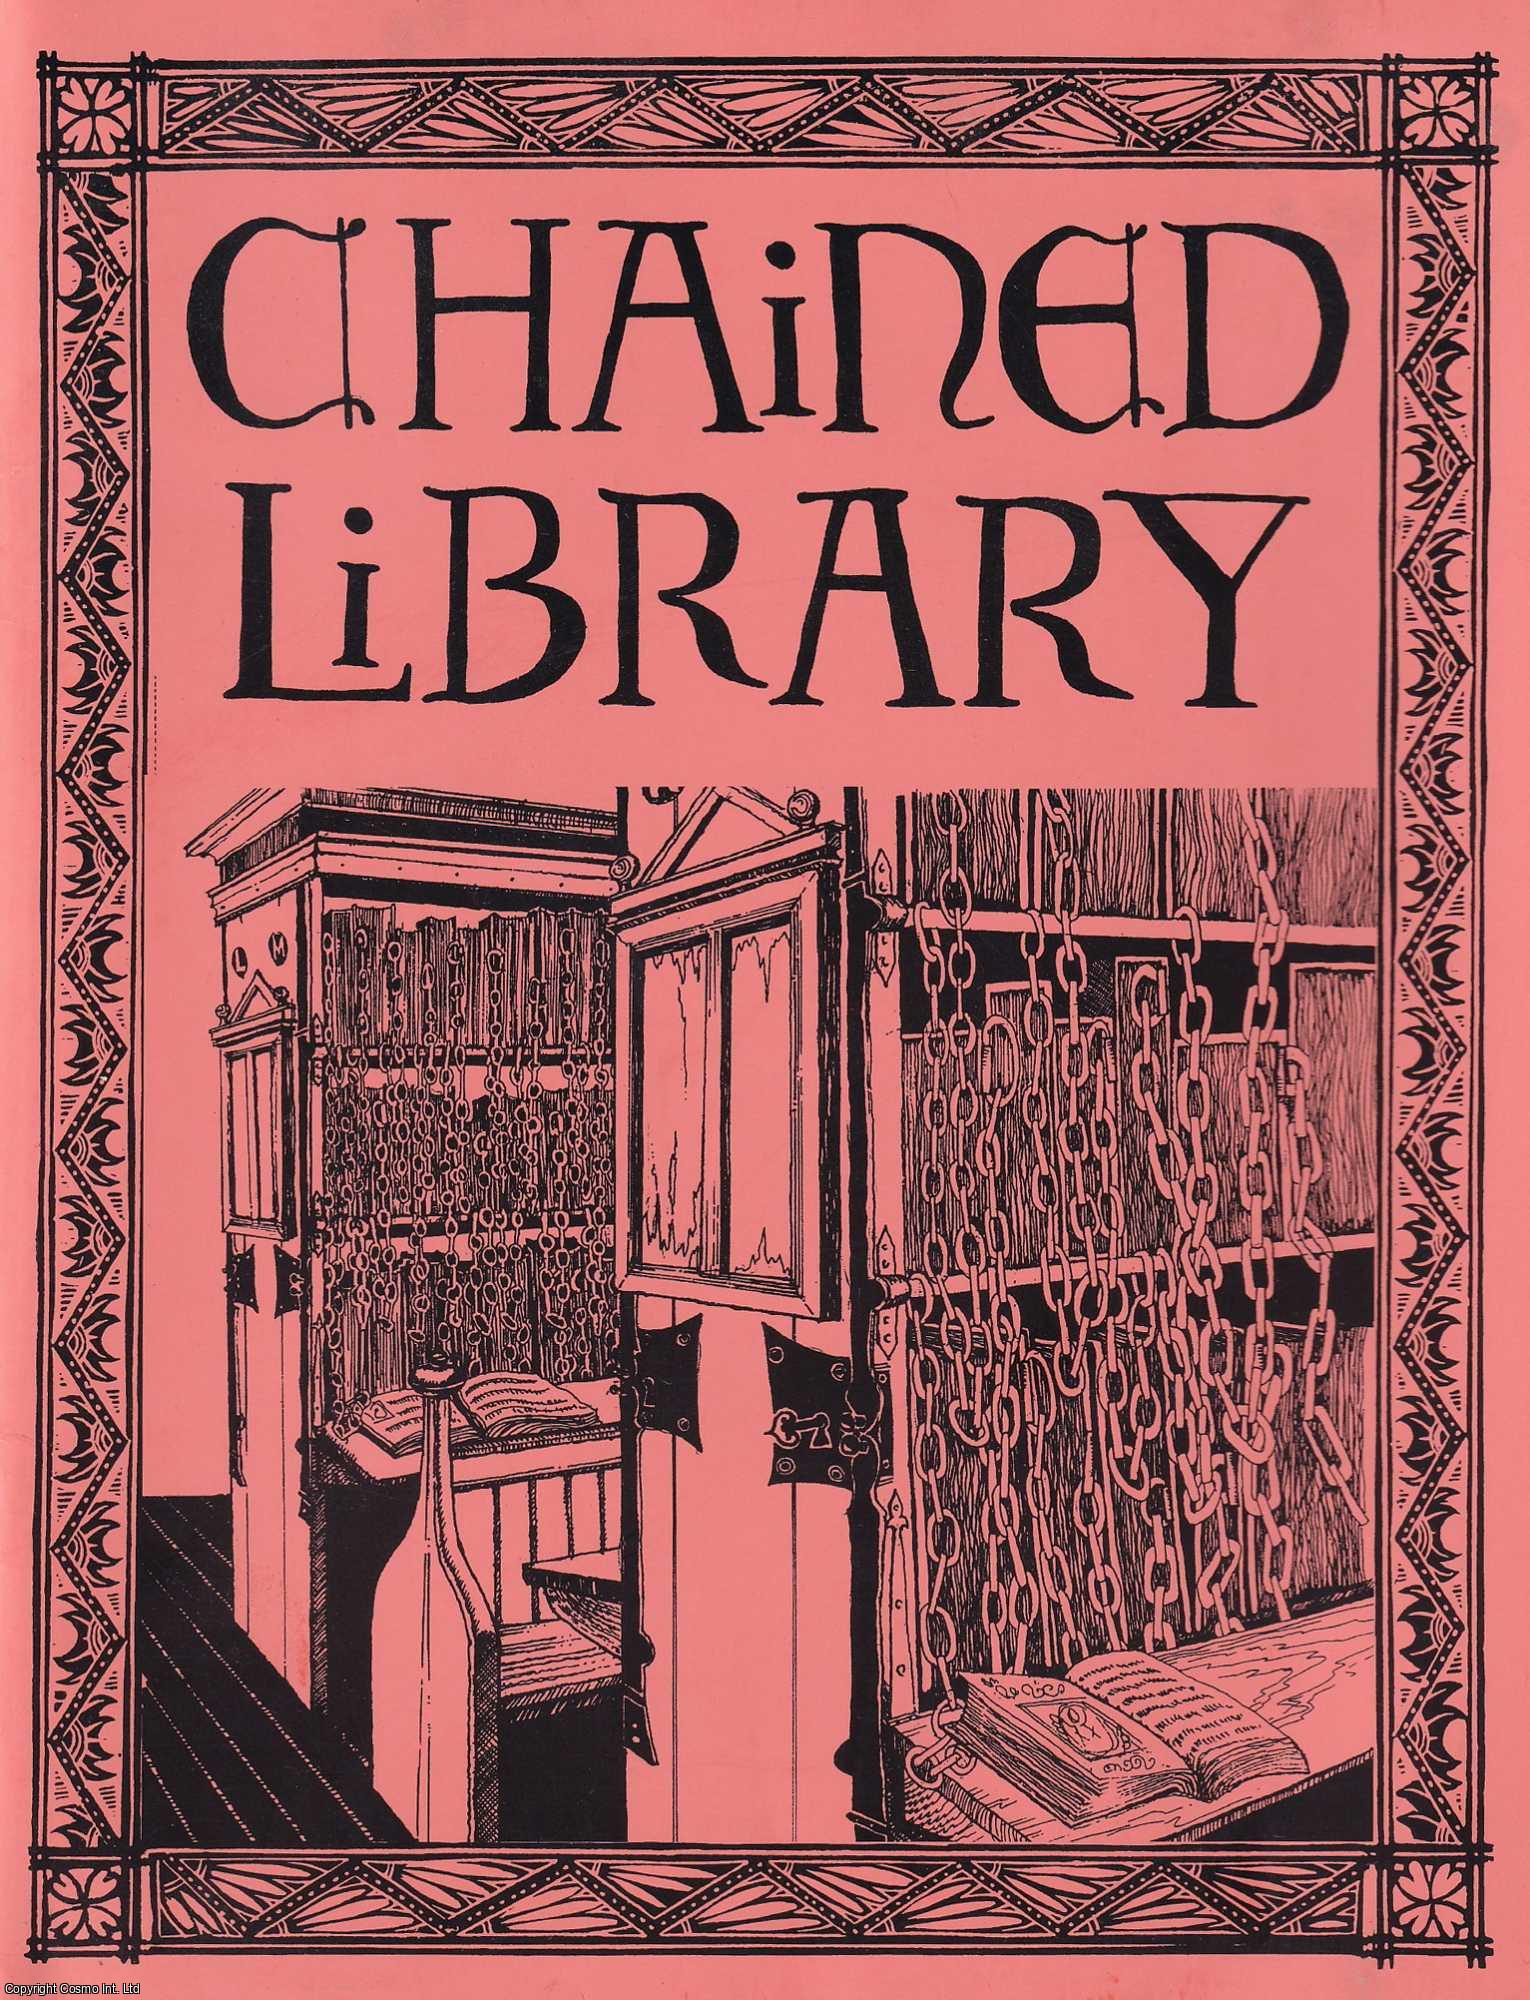 HEREFORD CATHEDRAL LIBRARY I - The Chained Library at Hereford Cathedral, by Joan Williams.